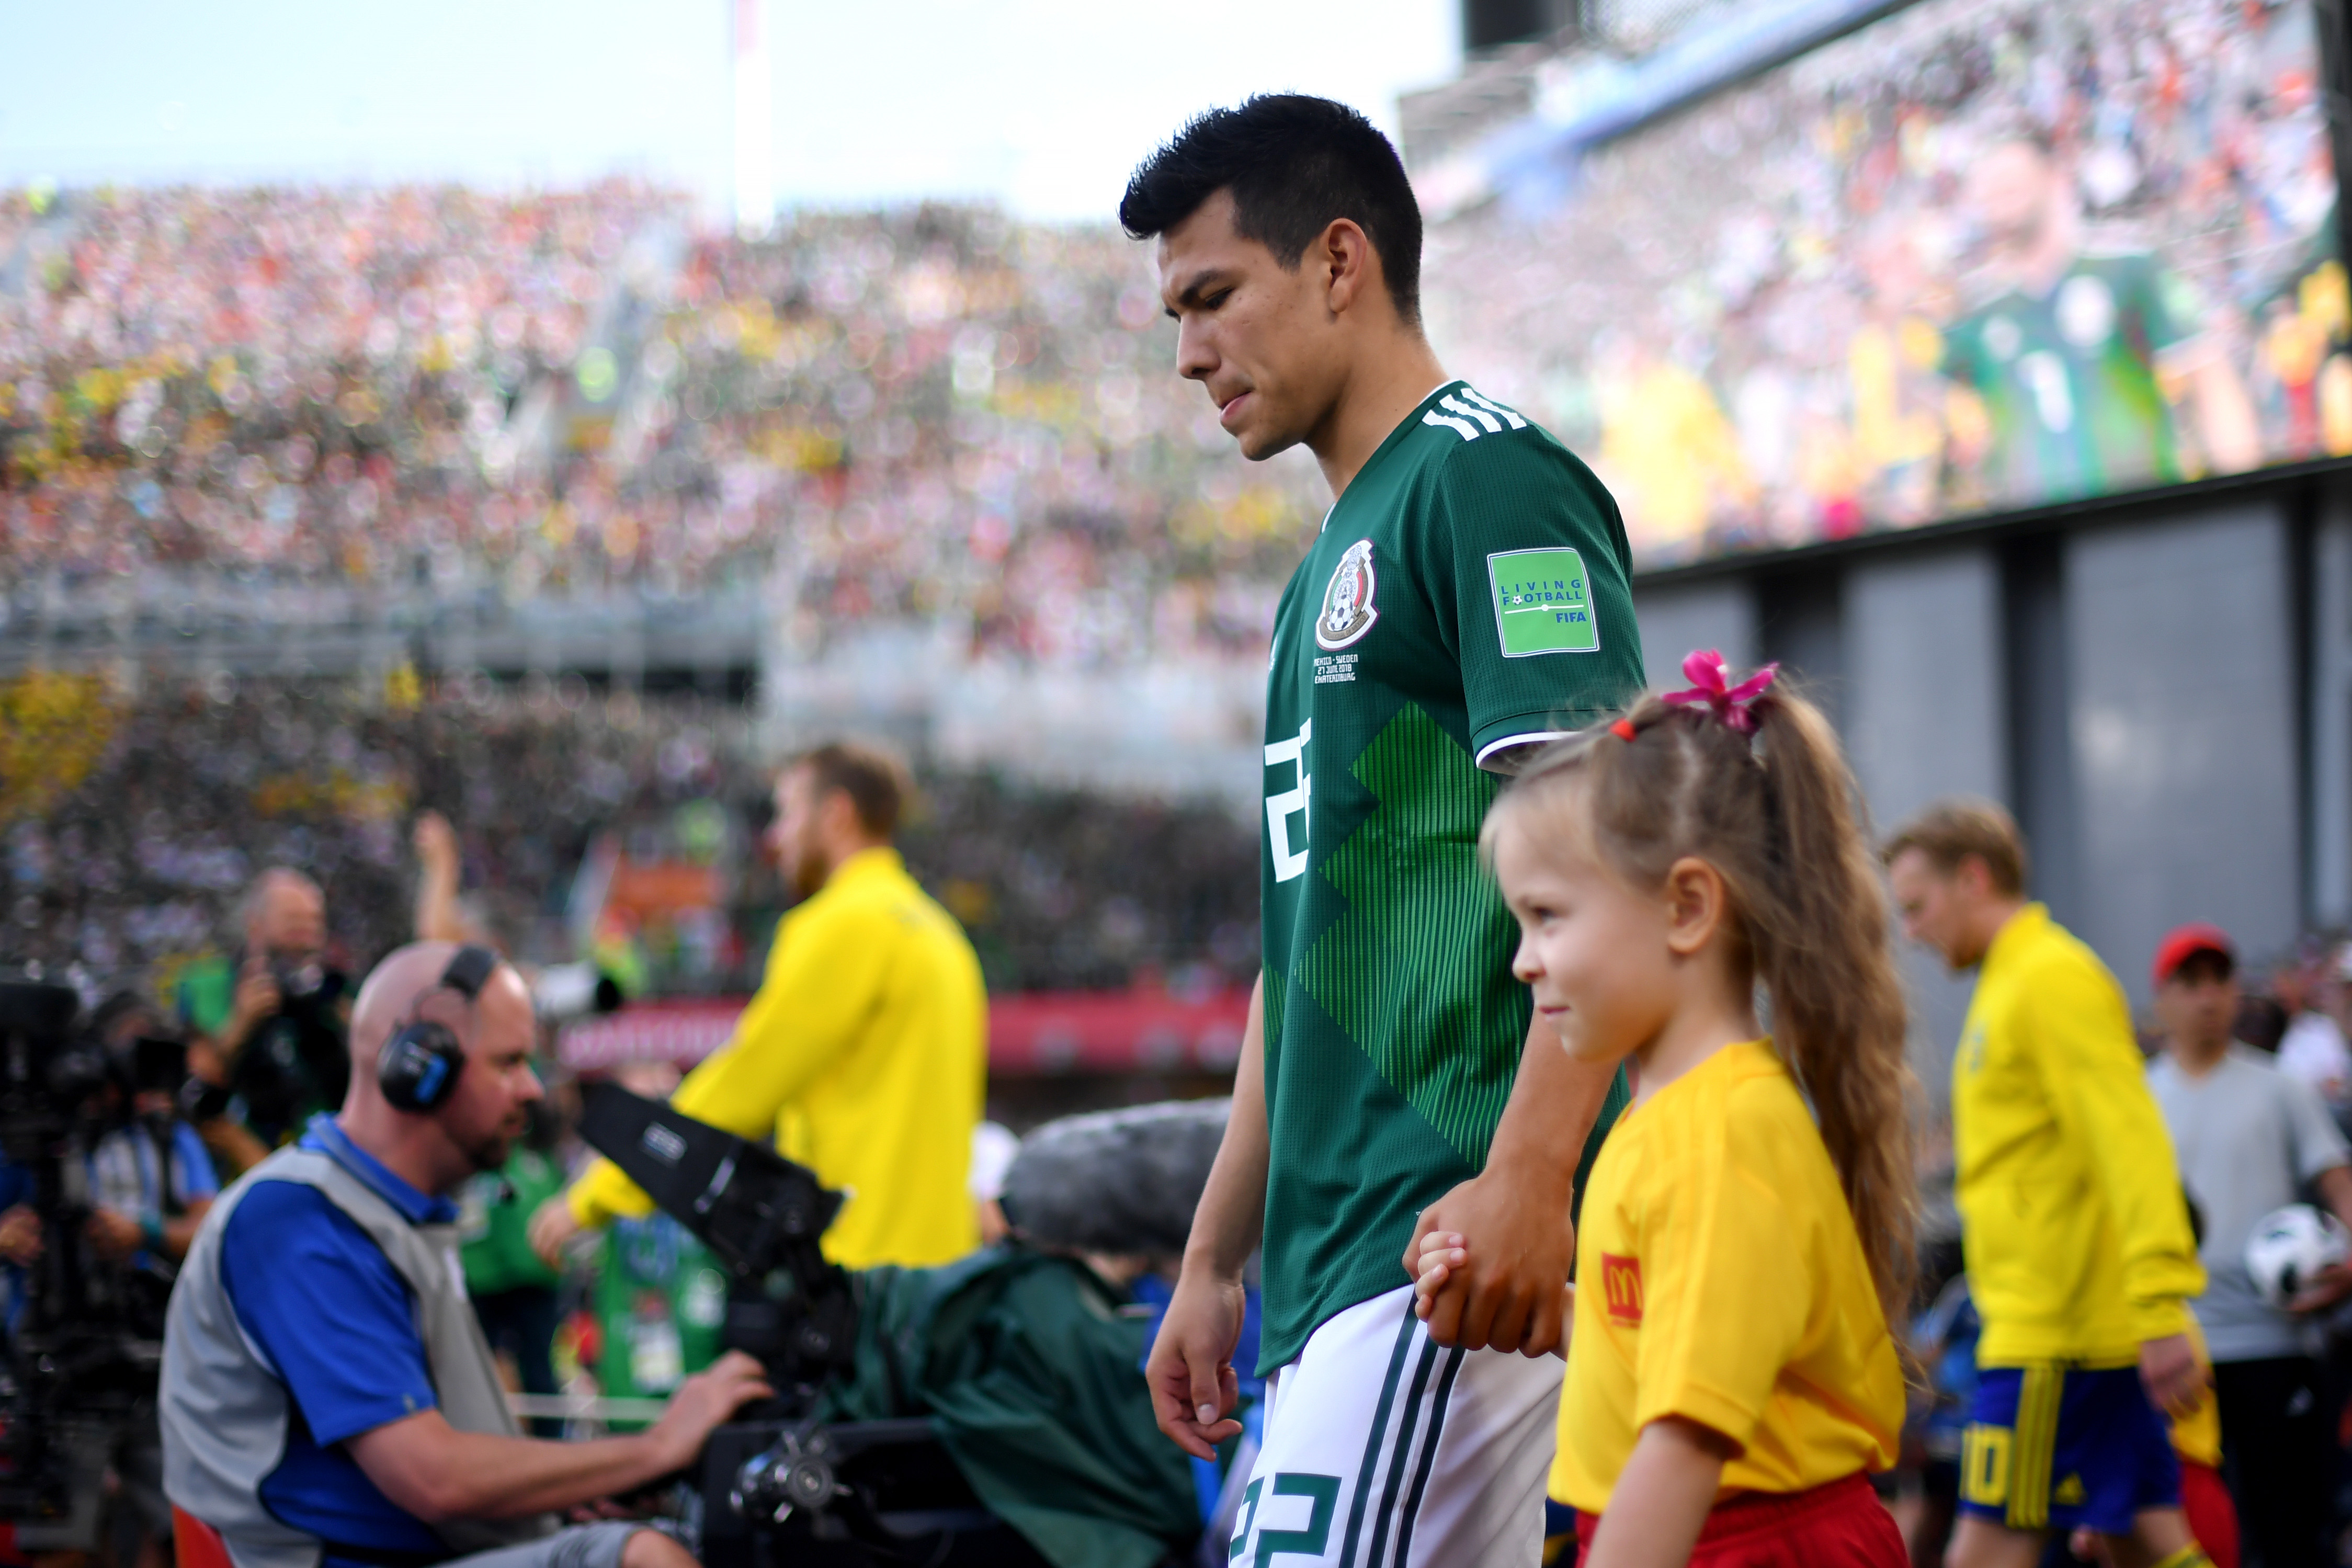 YEKATERINBURG, RUSSIA - JUNE 27:  Hirving Lozano of Mexico walks on the pitch prior to the 2018 FIFA World Cup Russia group F match between Mexico and Sweden at Ekaterinburg Arena on June 27, 2018 in Yekaterinburg, Russia.  (Photo by Hector Vivas/Getty Images)